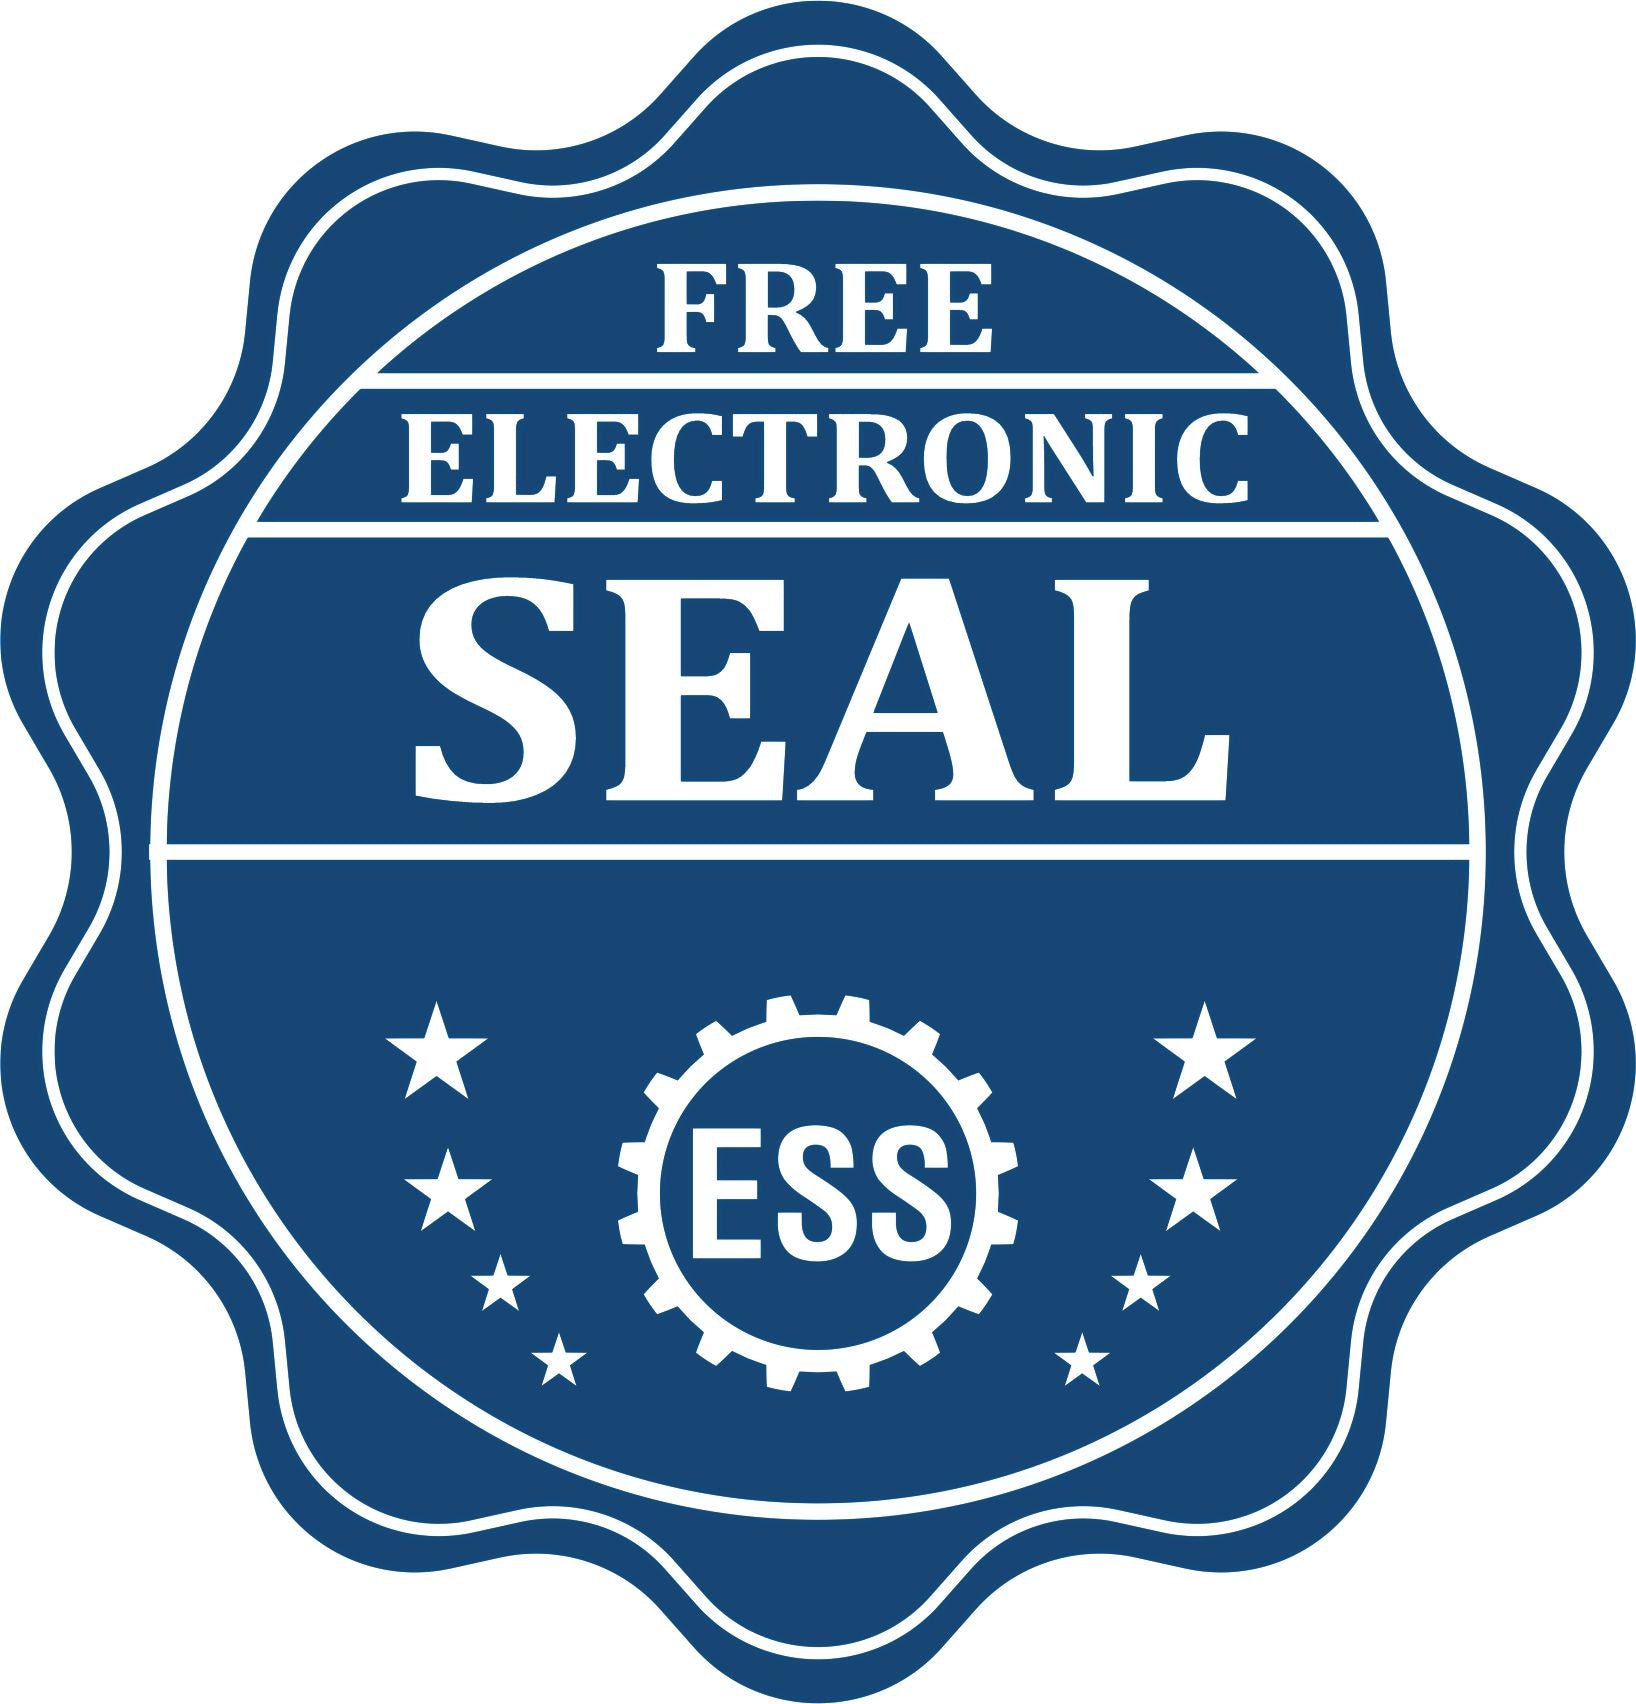 A badge showing a free electronic seal for the State of Kentucky Extended Long Reach Landscape Architect Seal Embosser with stars and the ESS gear on the emblem.